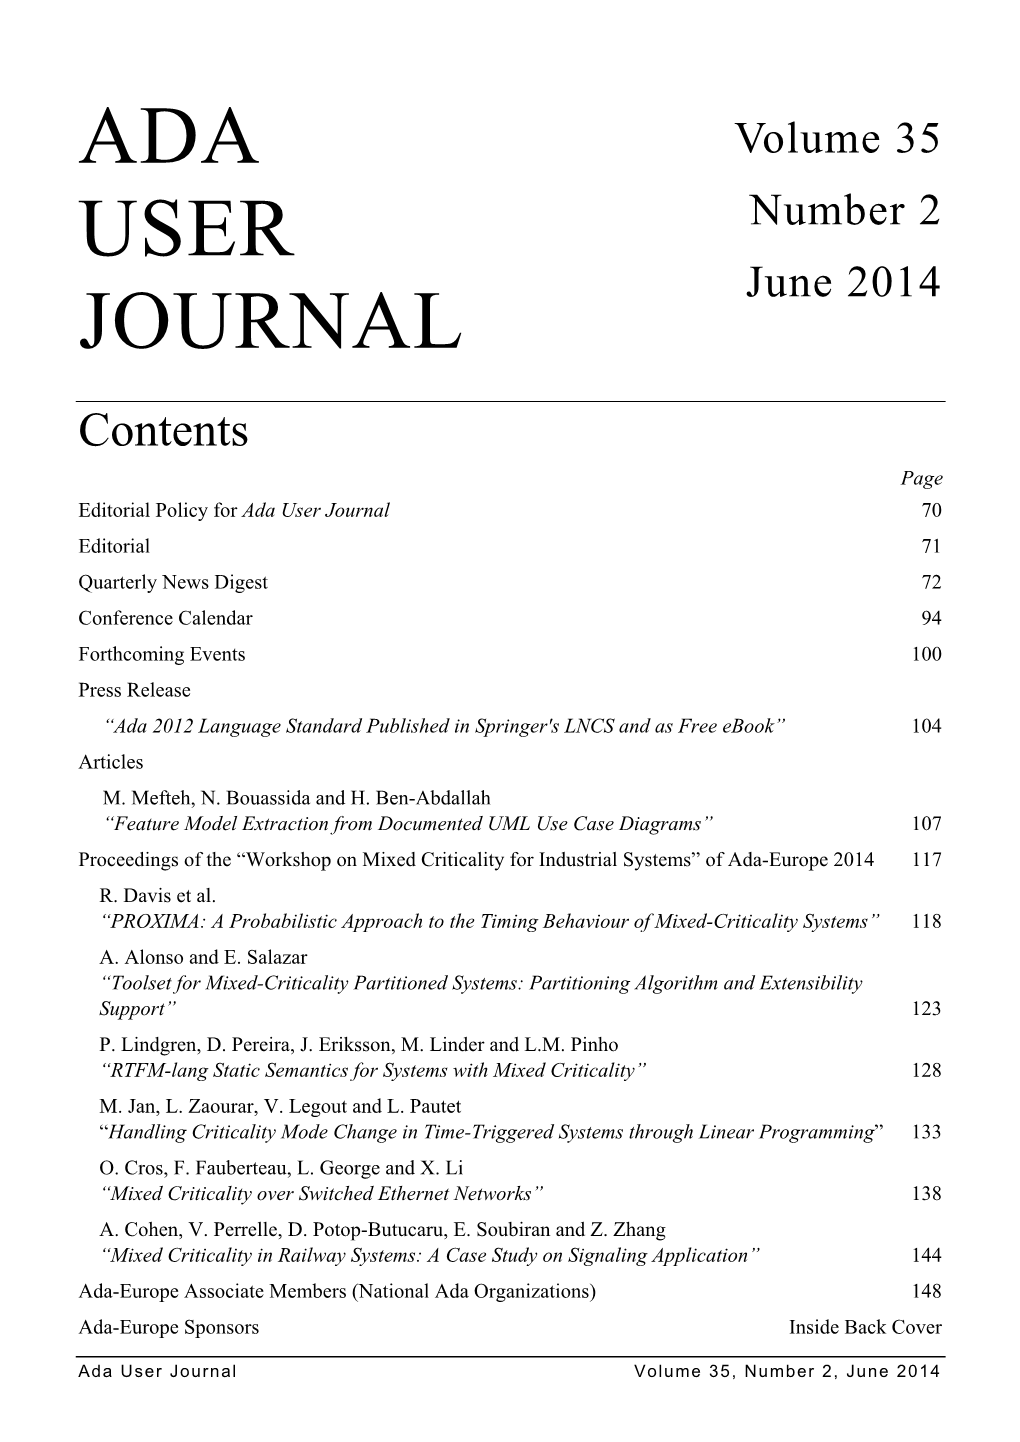 Ada-Europe 2015 Can Be Found in the Forthcoming Events Section of the Journal